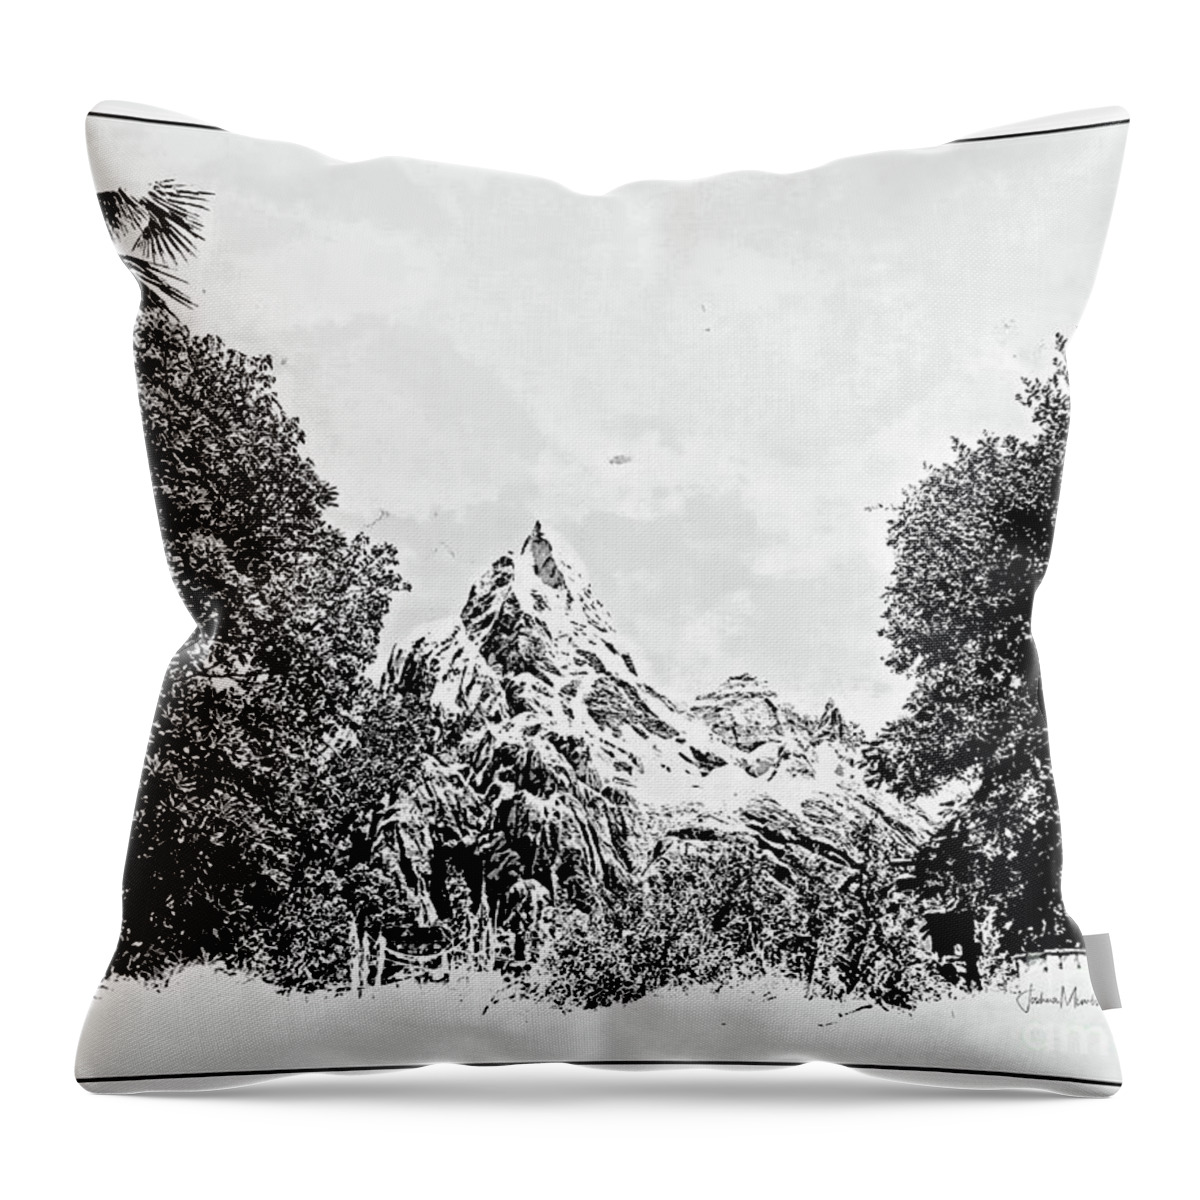 Expedition Everest Throw Pillow featuring the photograph Disney Expedition Everest by FineArtRoyal Joshua Mimbs